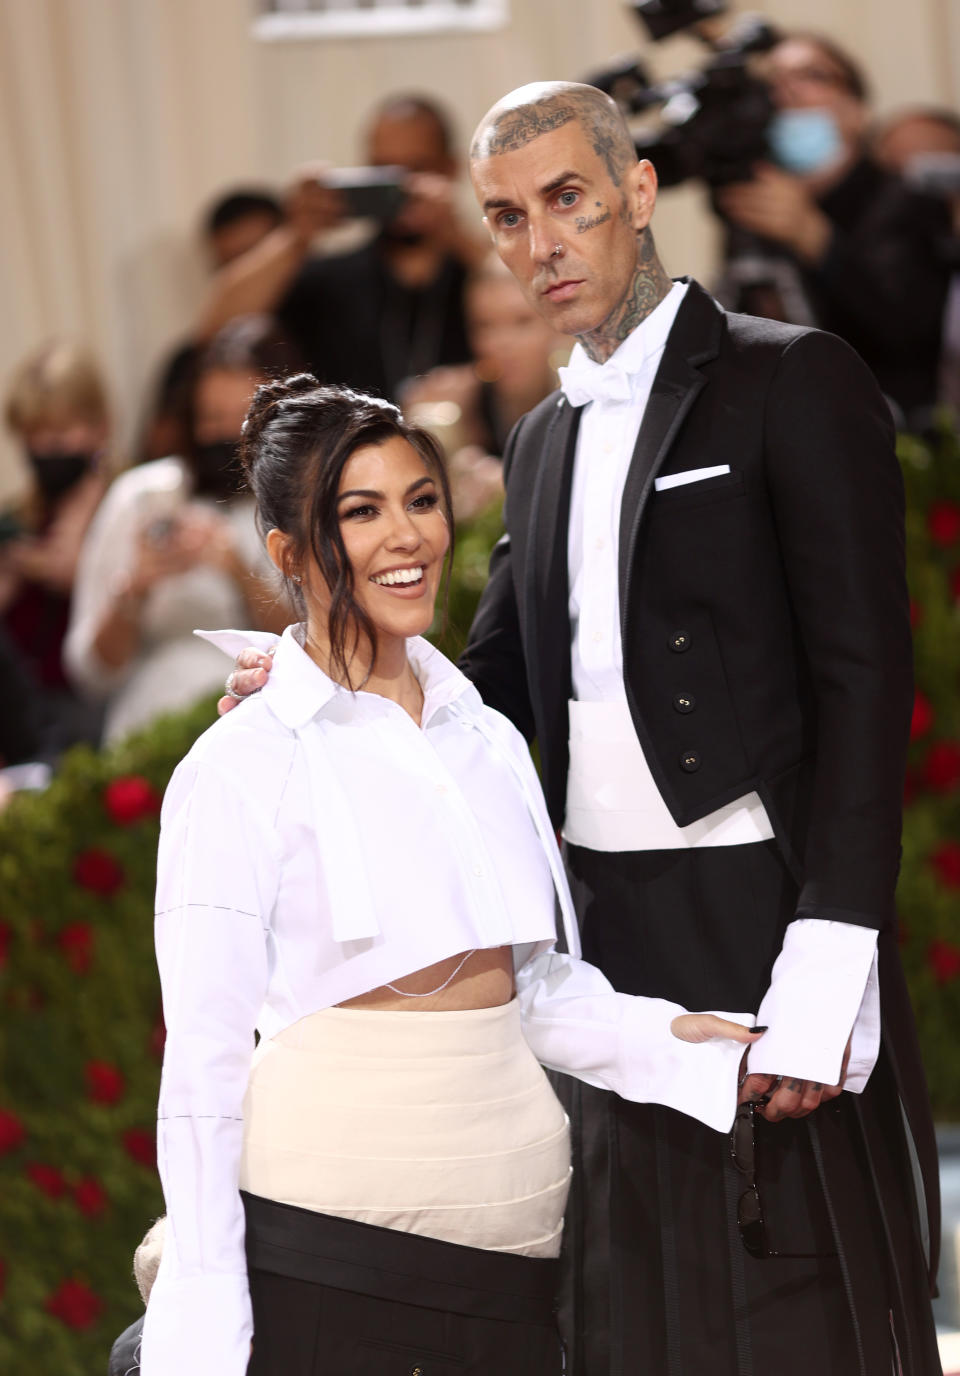 Kourtney Kardashian and Travis Barker wear Thom Browne at the 2022 Met Gala celebrating In America: An Anthology of Fashion. The annual event was held at the The Metropolitan Museum of Art in New York on May 2, 2022. (Photo by Chris Polk/WWD/Penske Media via Getty Images)